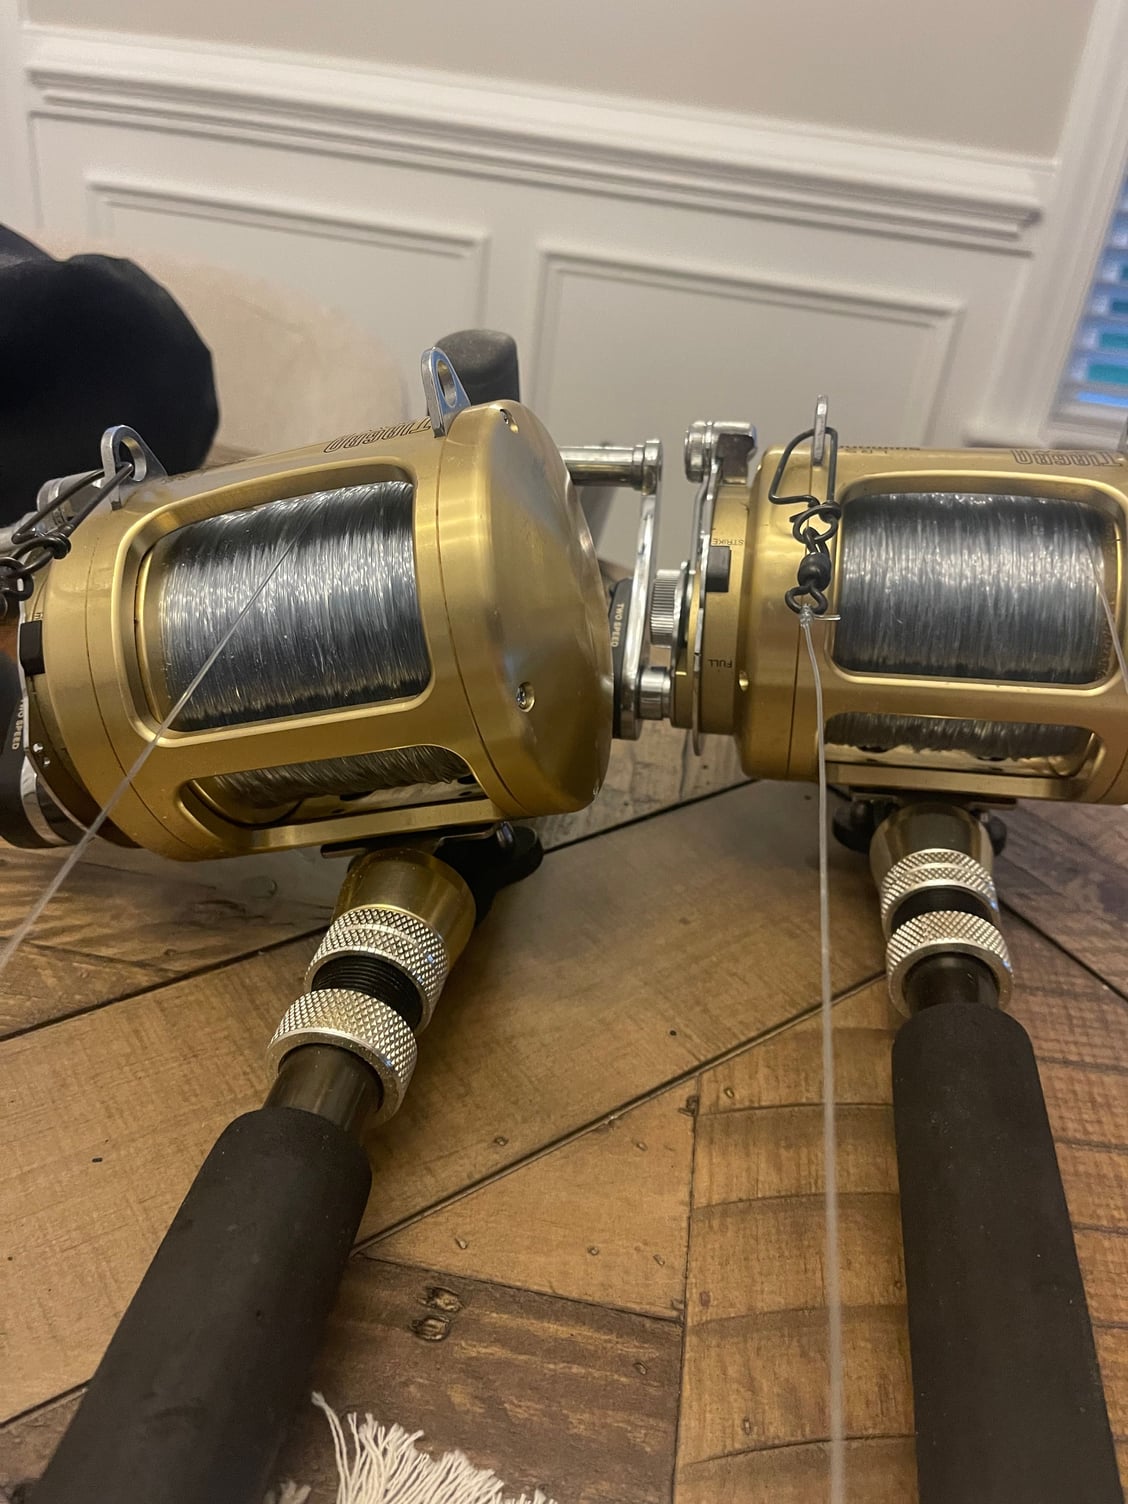 Shimano tiagra 30w chaos rods - The Hull Truth - Boating and Fishing Forum